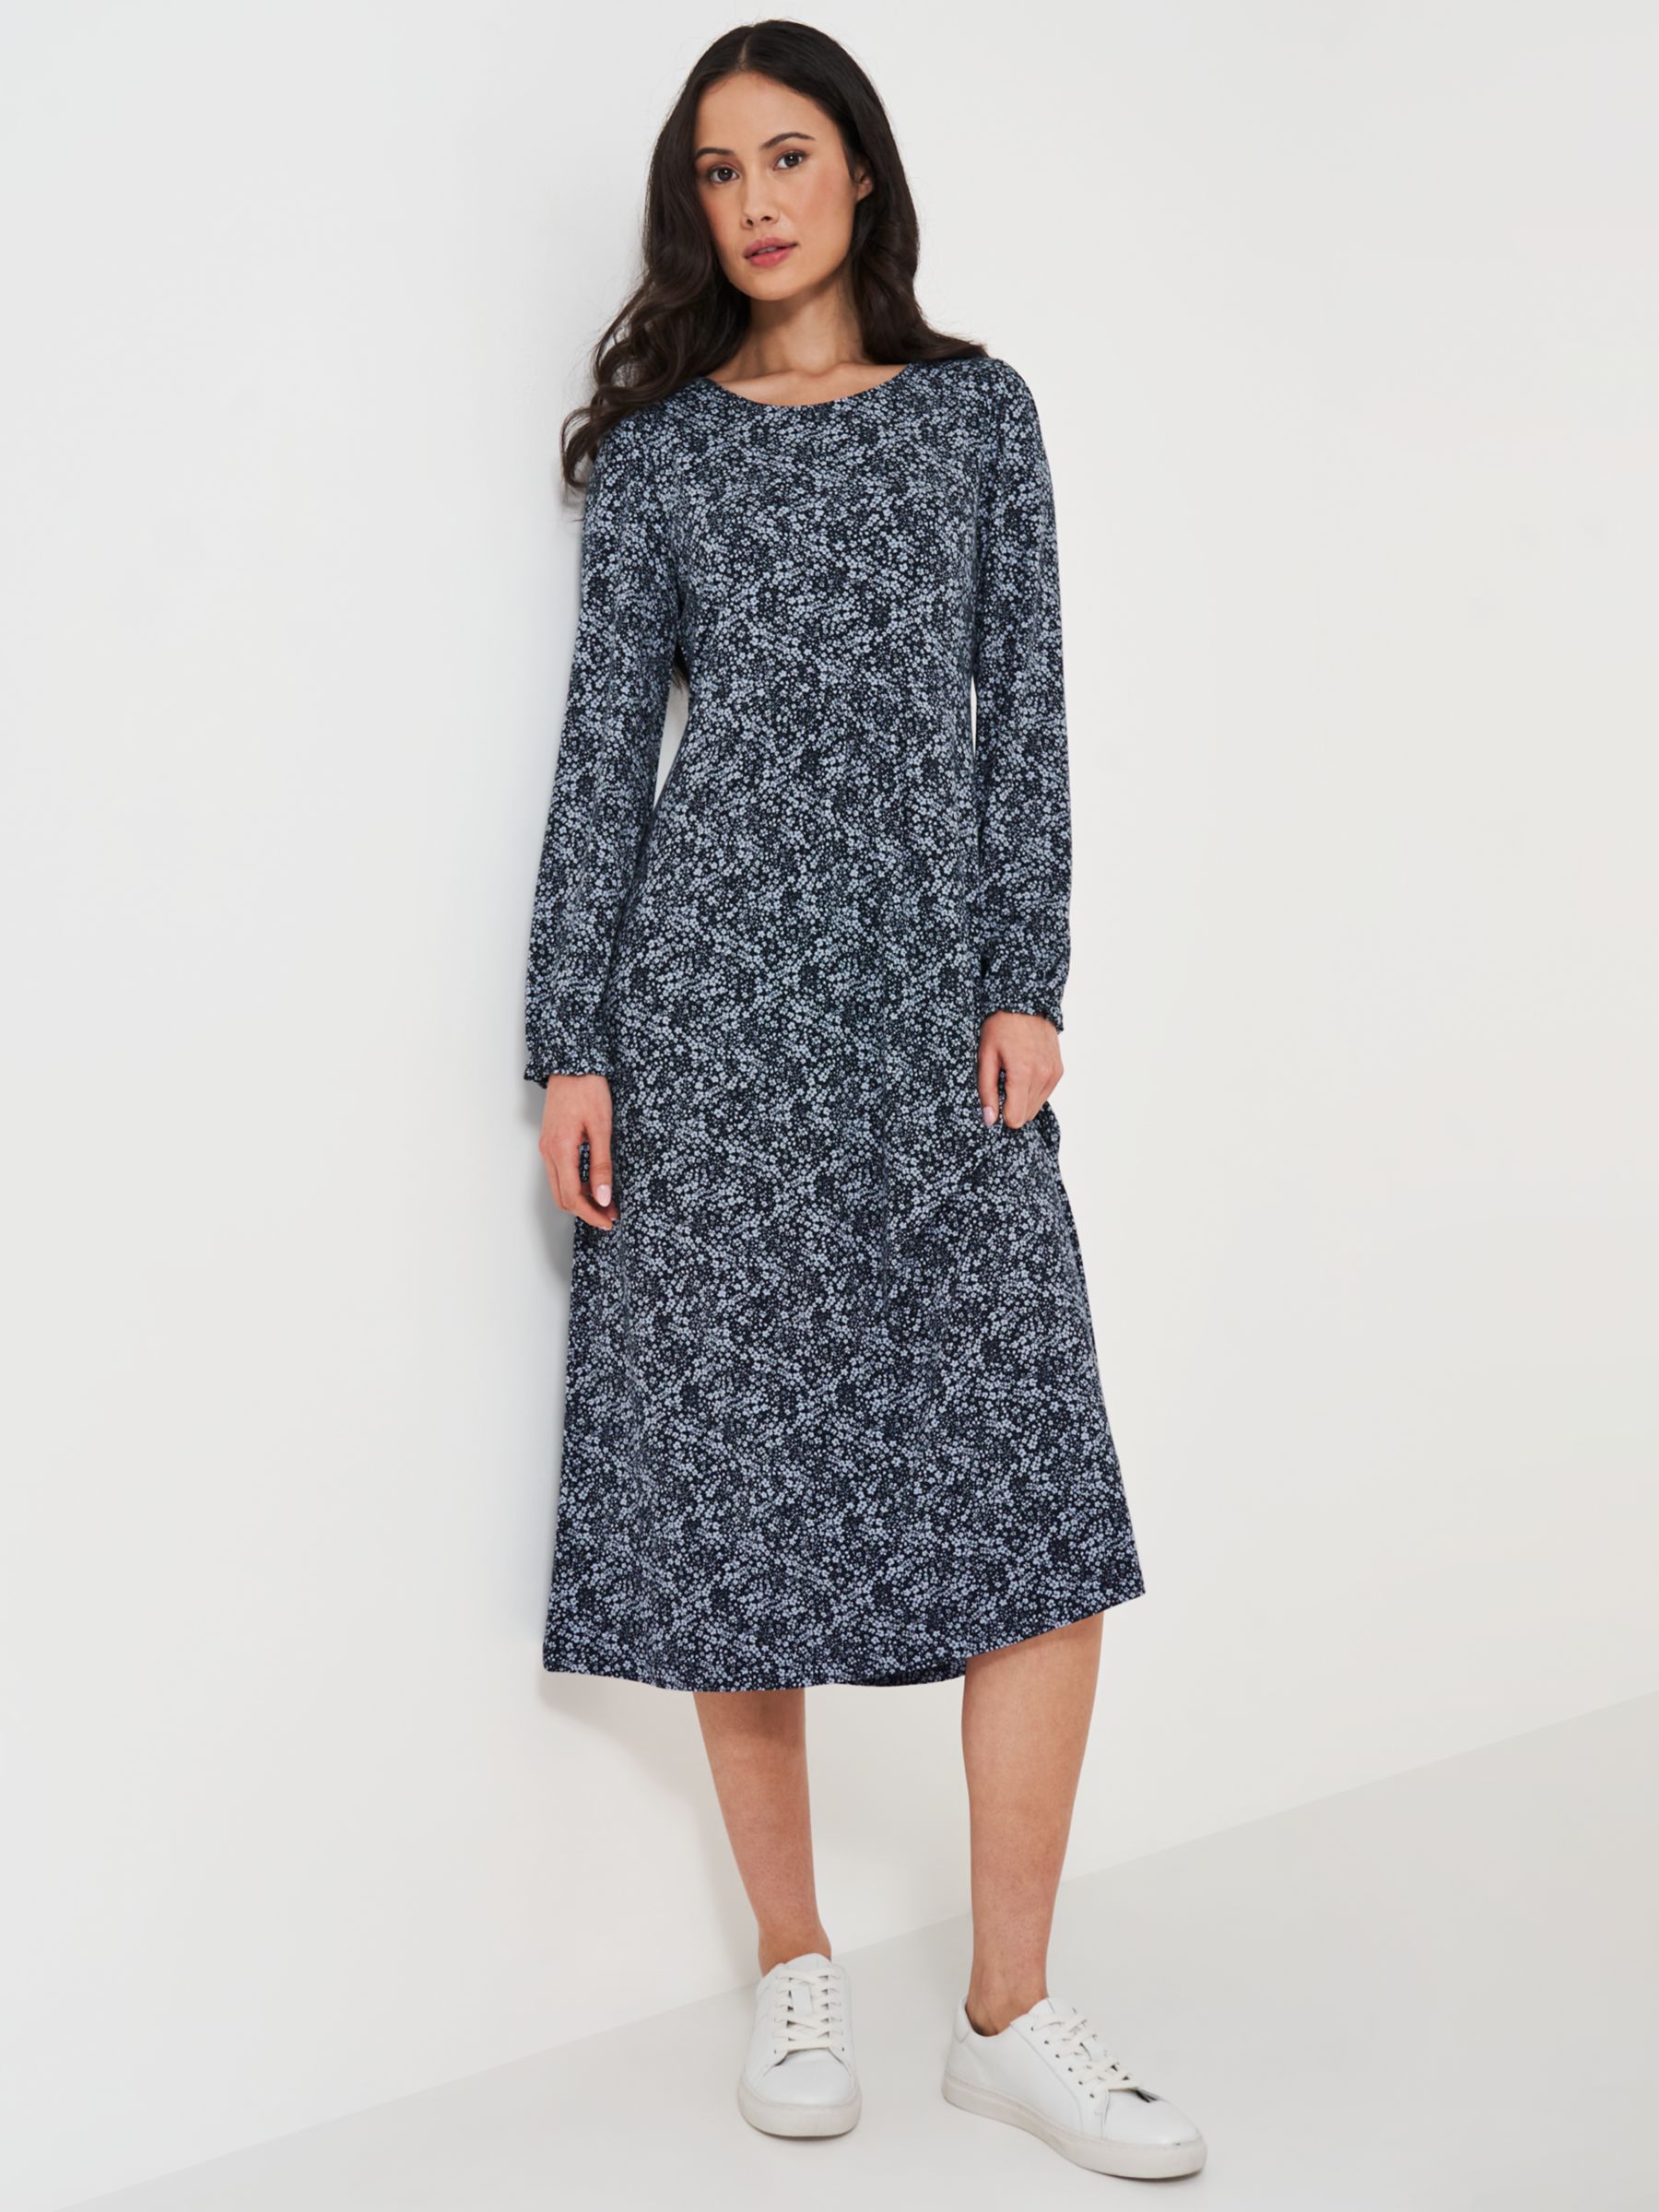 Buy Crew Clothing Ditsy Floral Print Jersey Maxi Dress, Light Blue/Navy Online at johnlewis.com